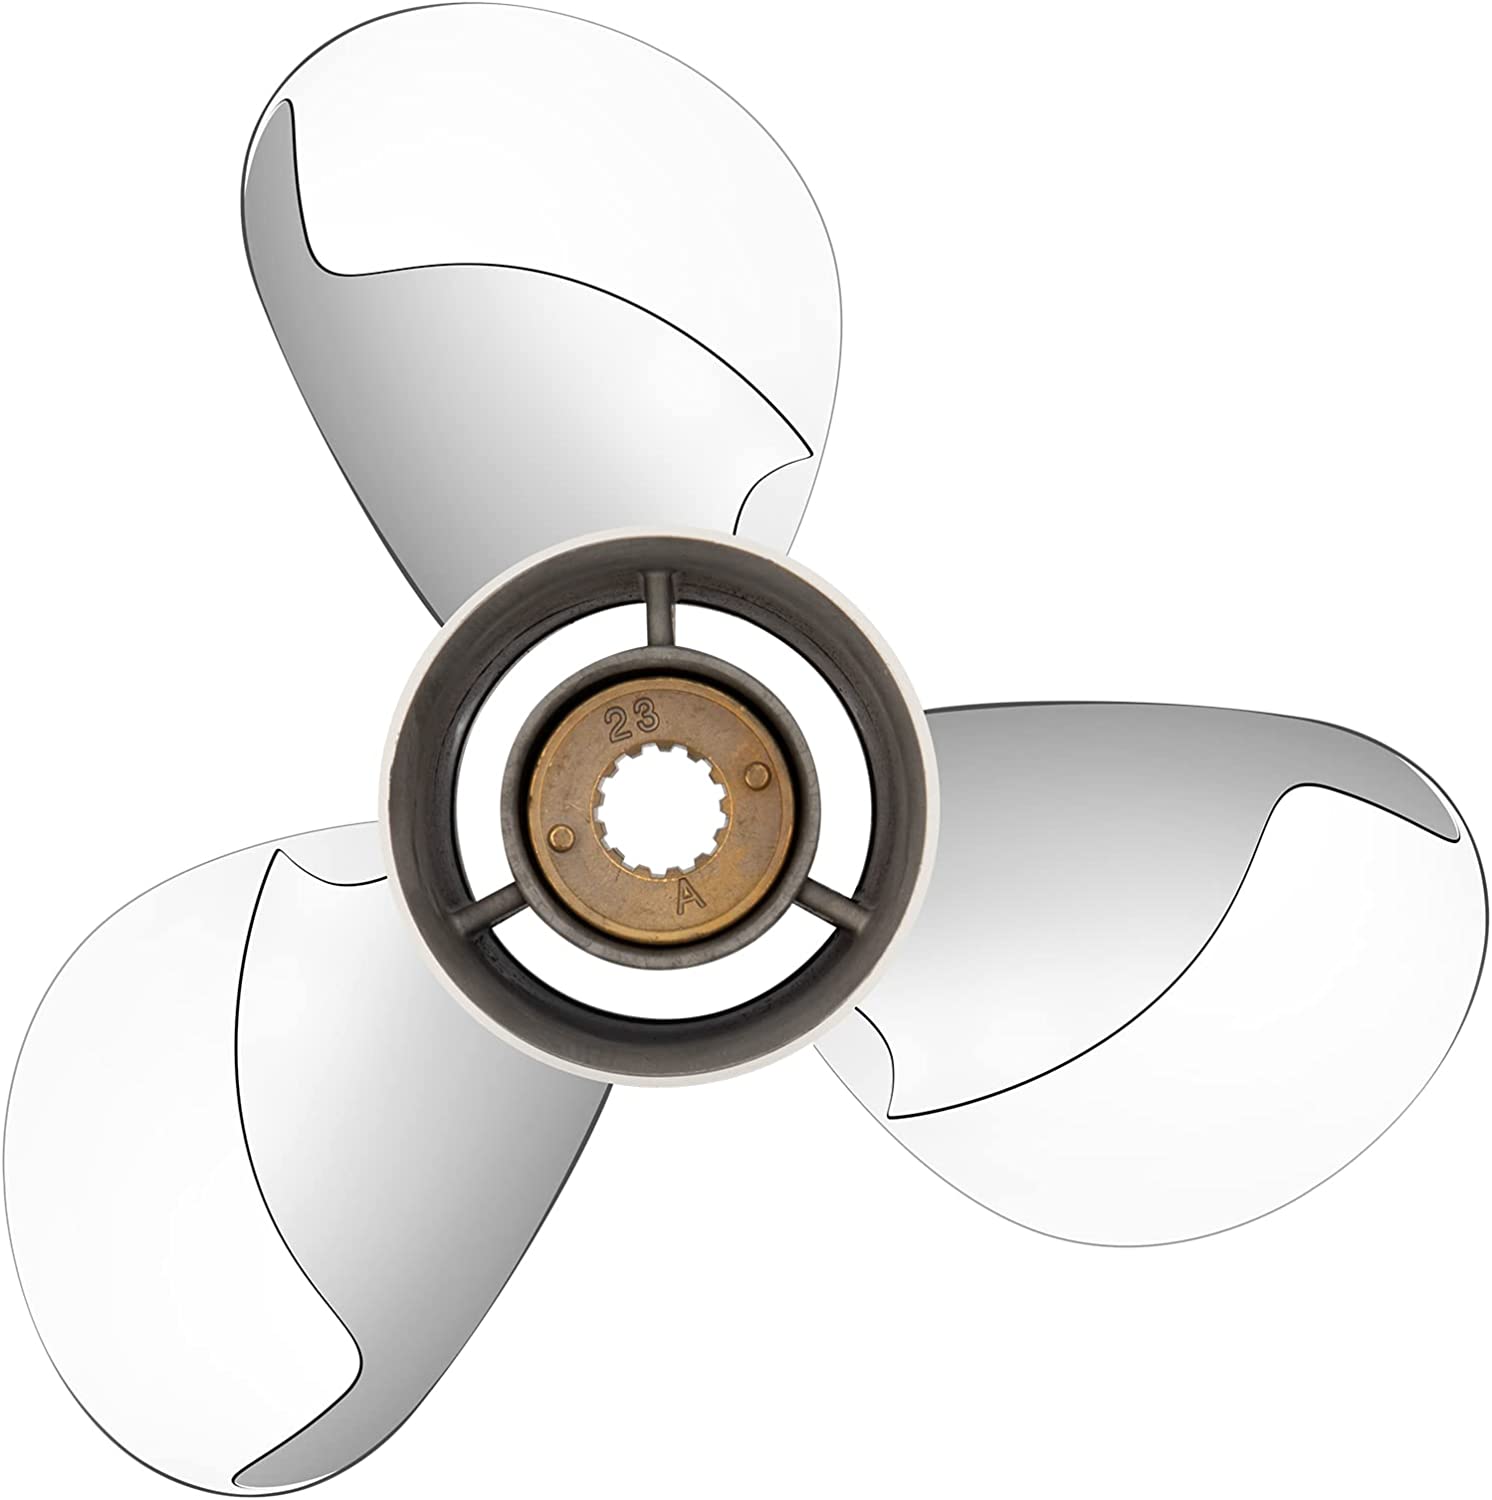 11 3/8 x14,11 5/8 x12 OEM Stainless Steel Outboard Propeller fit Mercury Engines 25-70HP